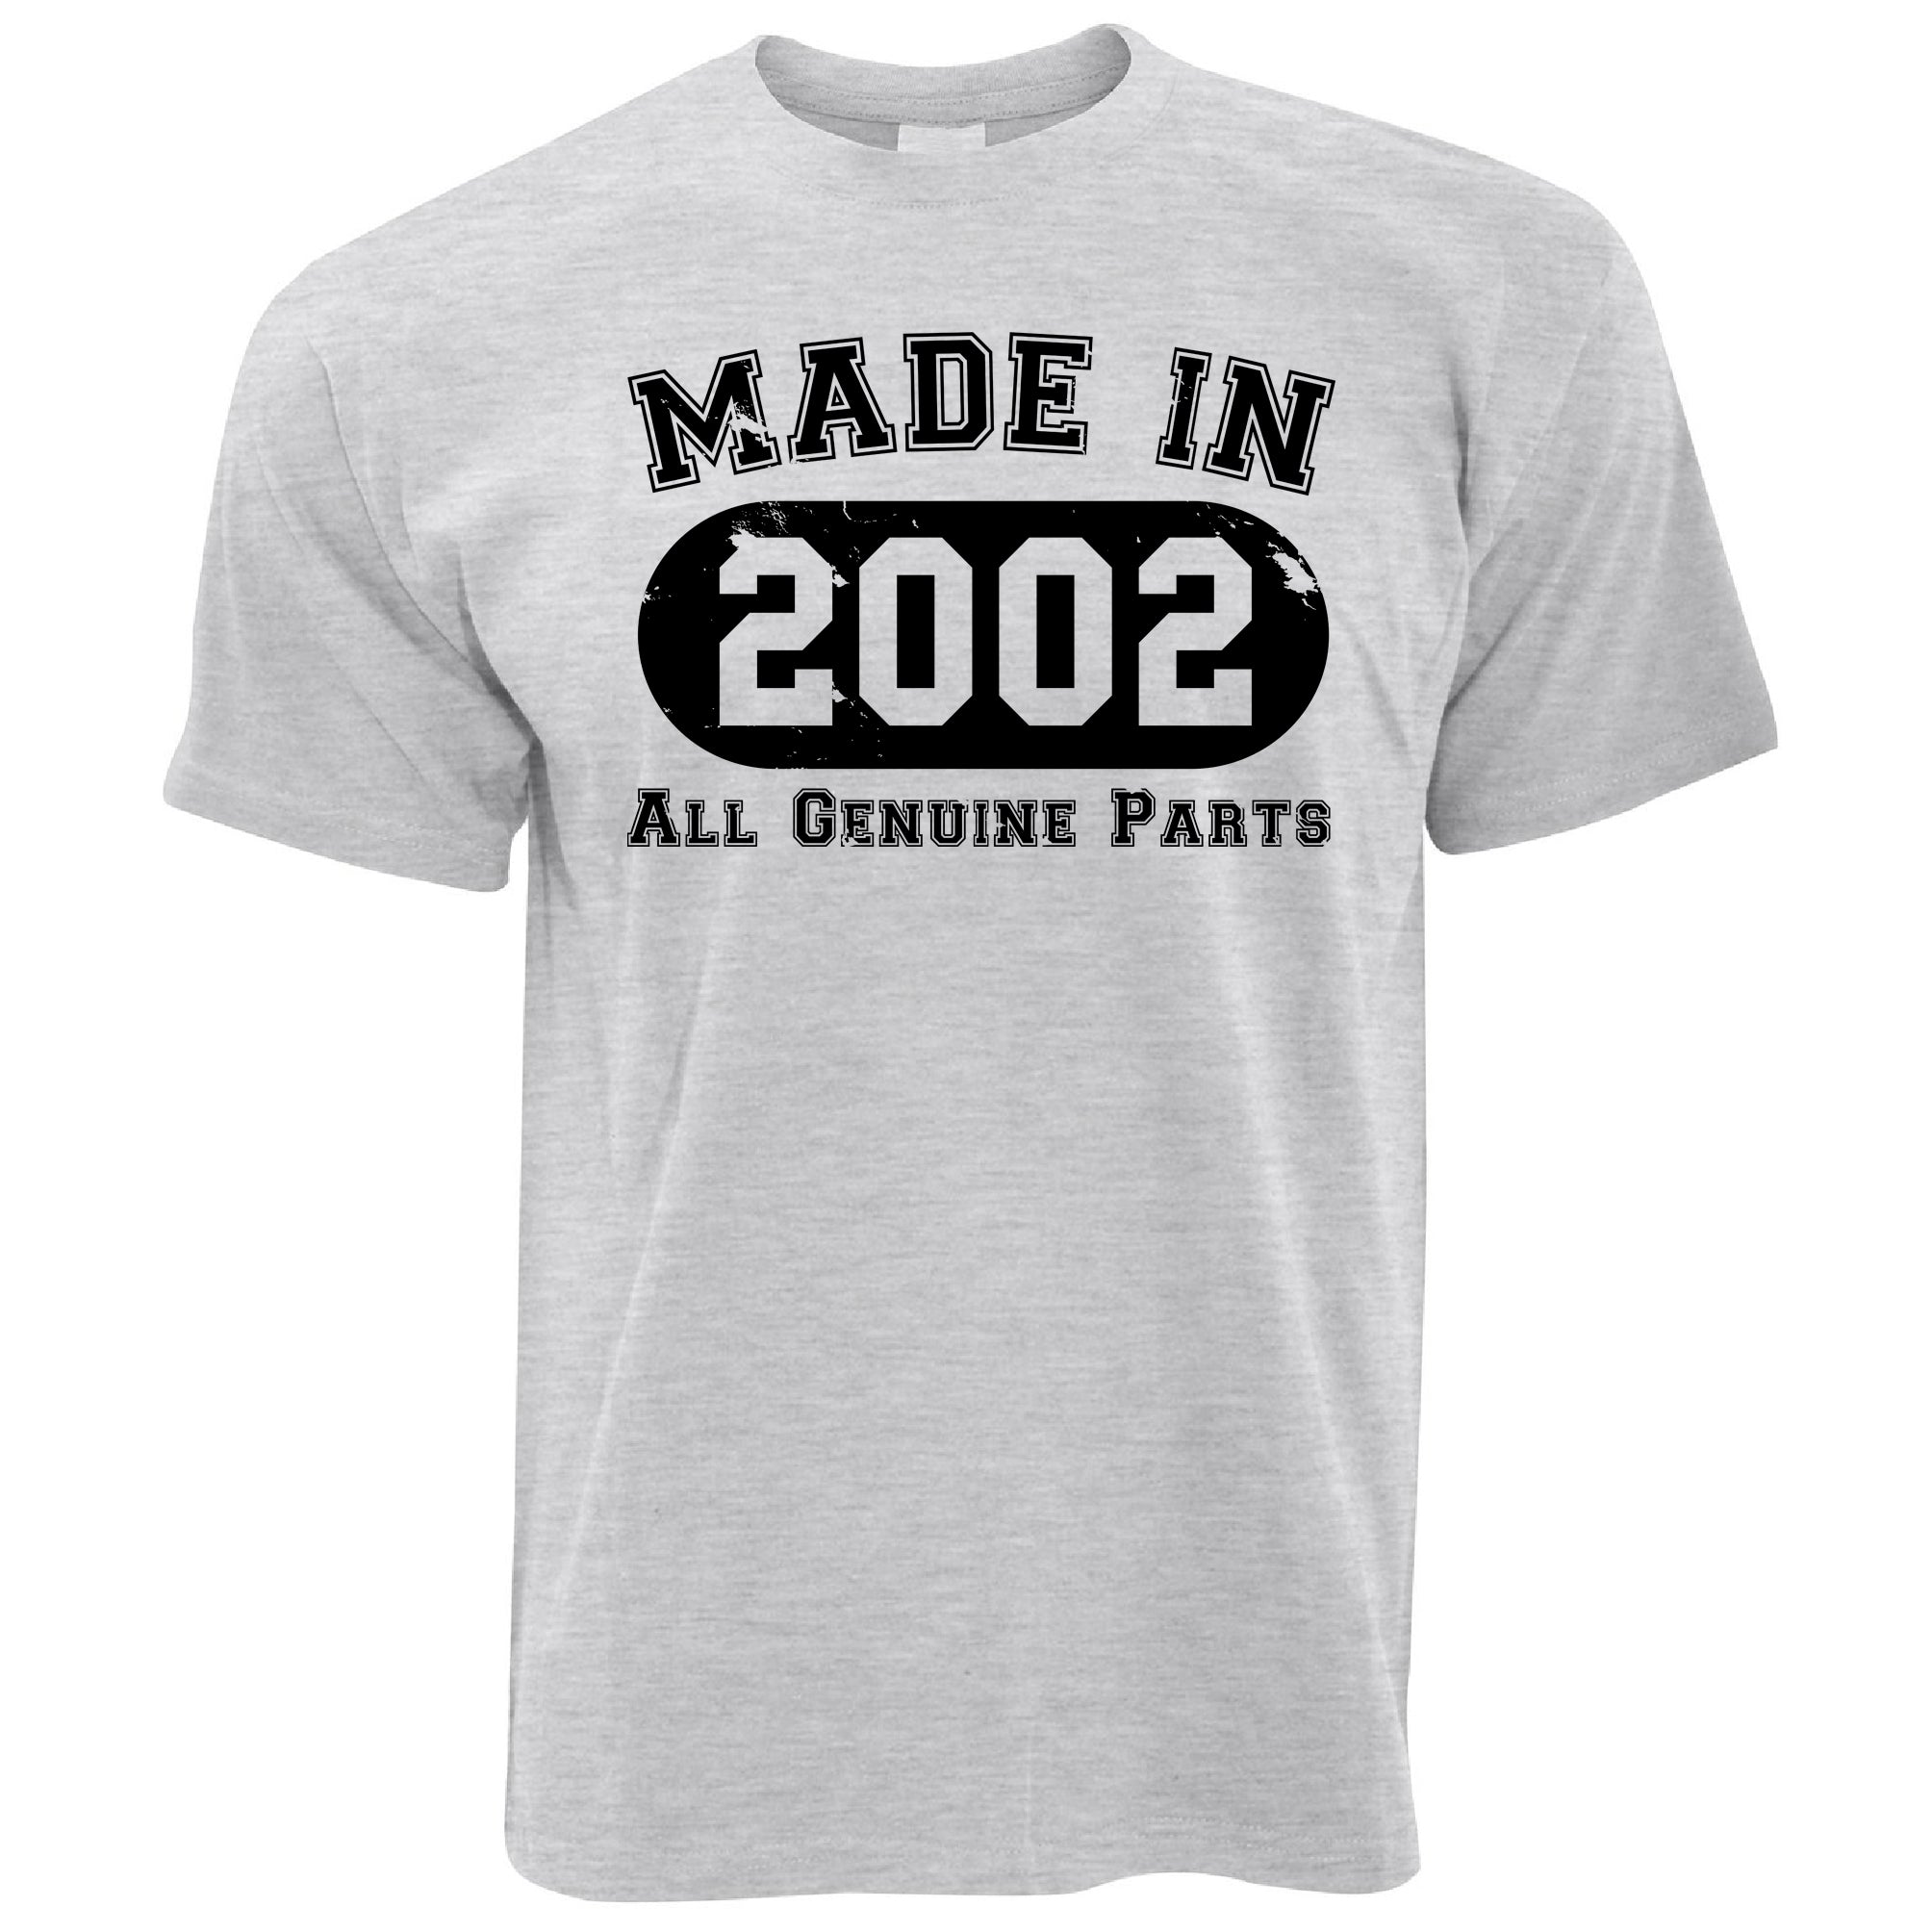 21st Birthday T Shirt Made in 2002 - All Genuine Parts